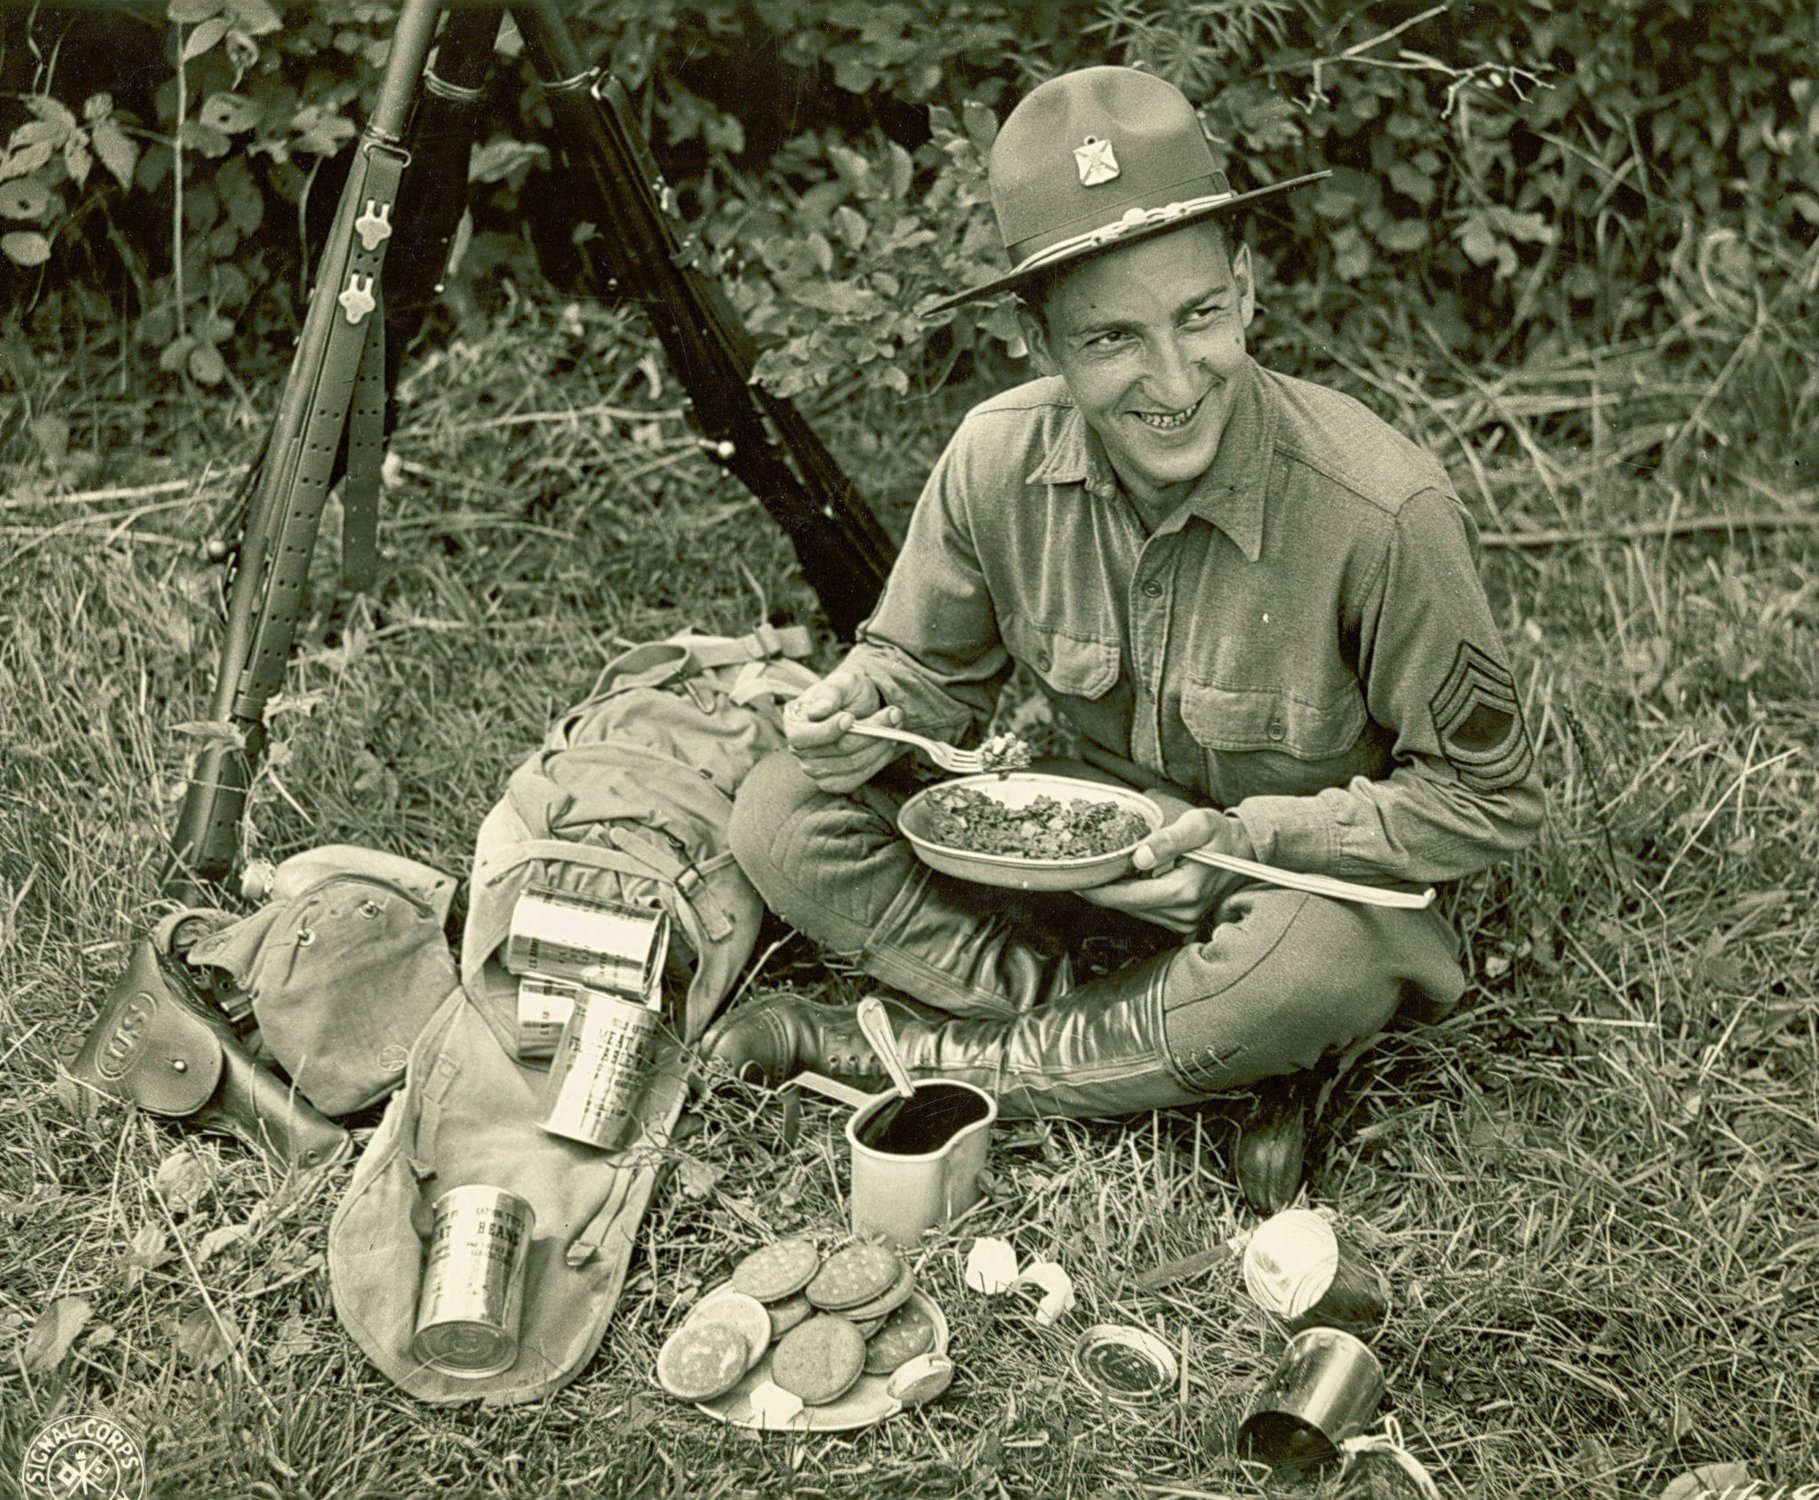 A soldier samples a batch of C-Rations during the Louisiana Maneuvers in the fall of 1941, just prior to America’s entry into World War II. Photo courtesy of the U.S. Army.